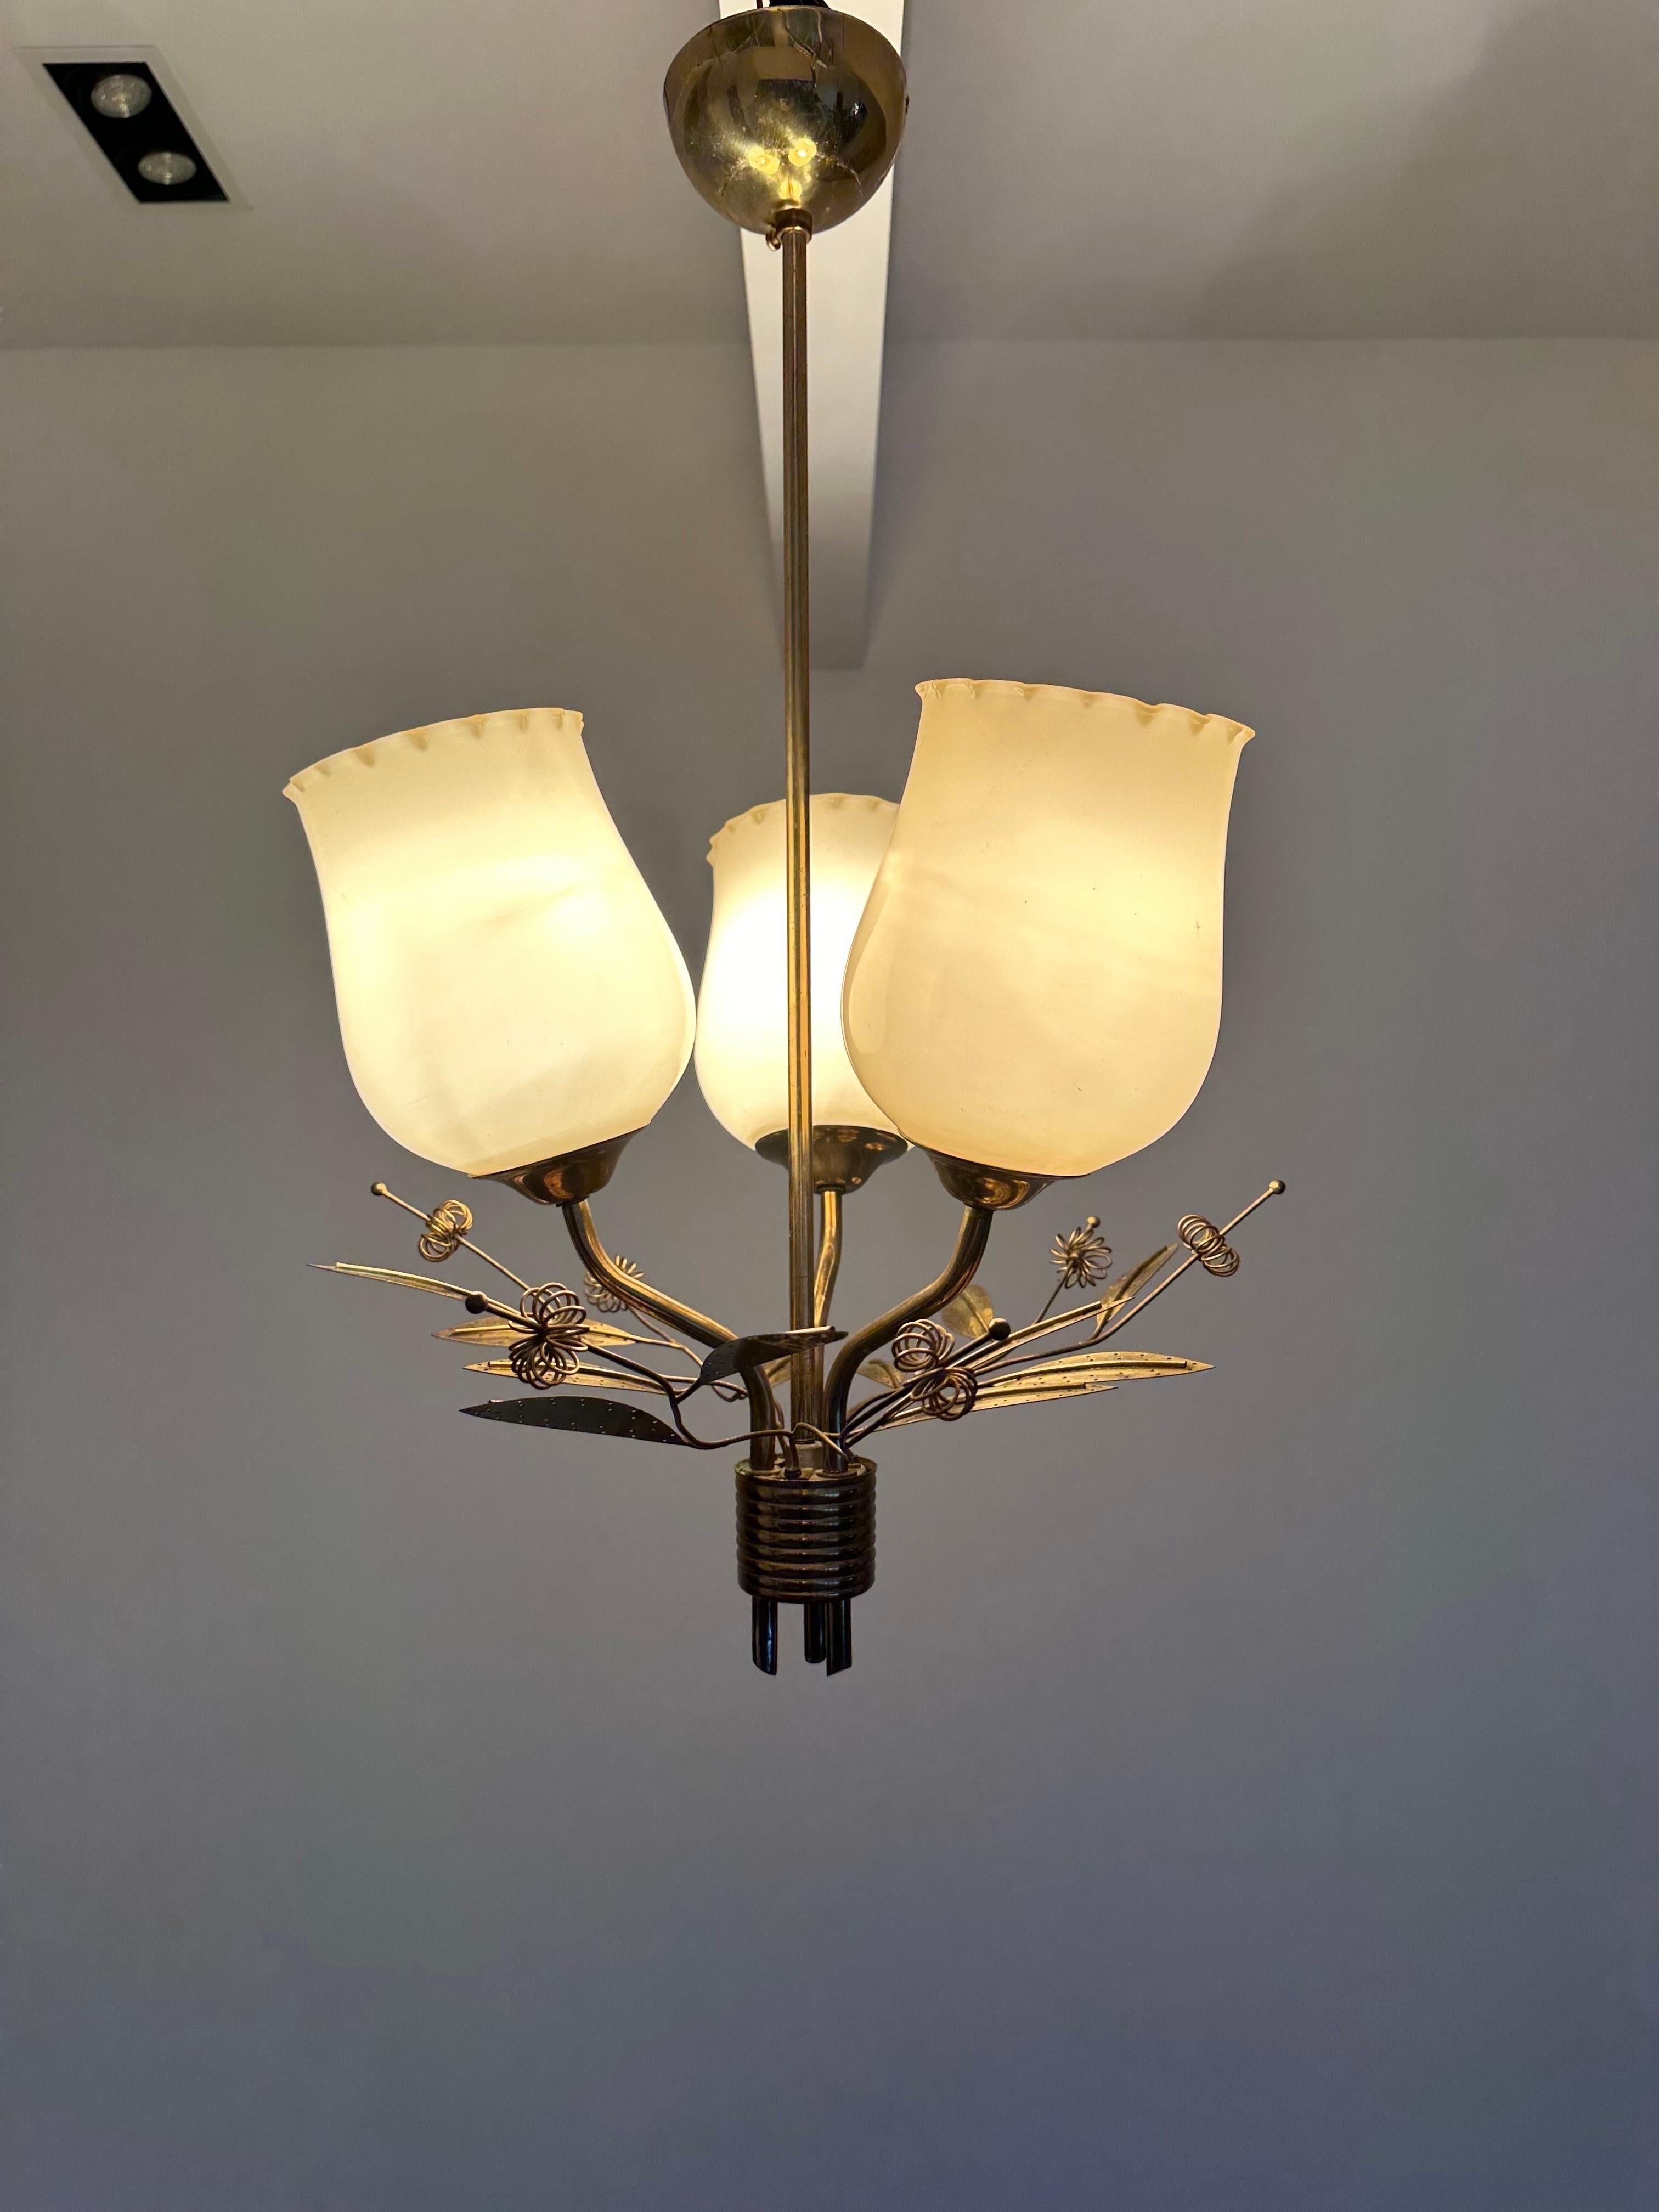 Itsu Ceiling Pendant, Helsinki Finland, Mid 20th Century In Good Condition For Sale In Espoo, FI